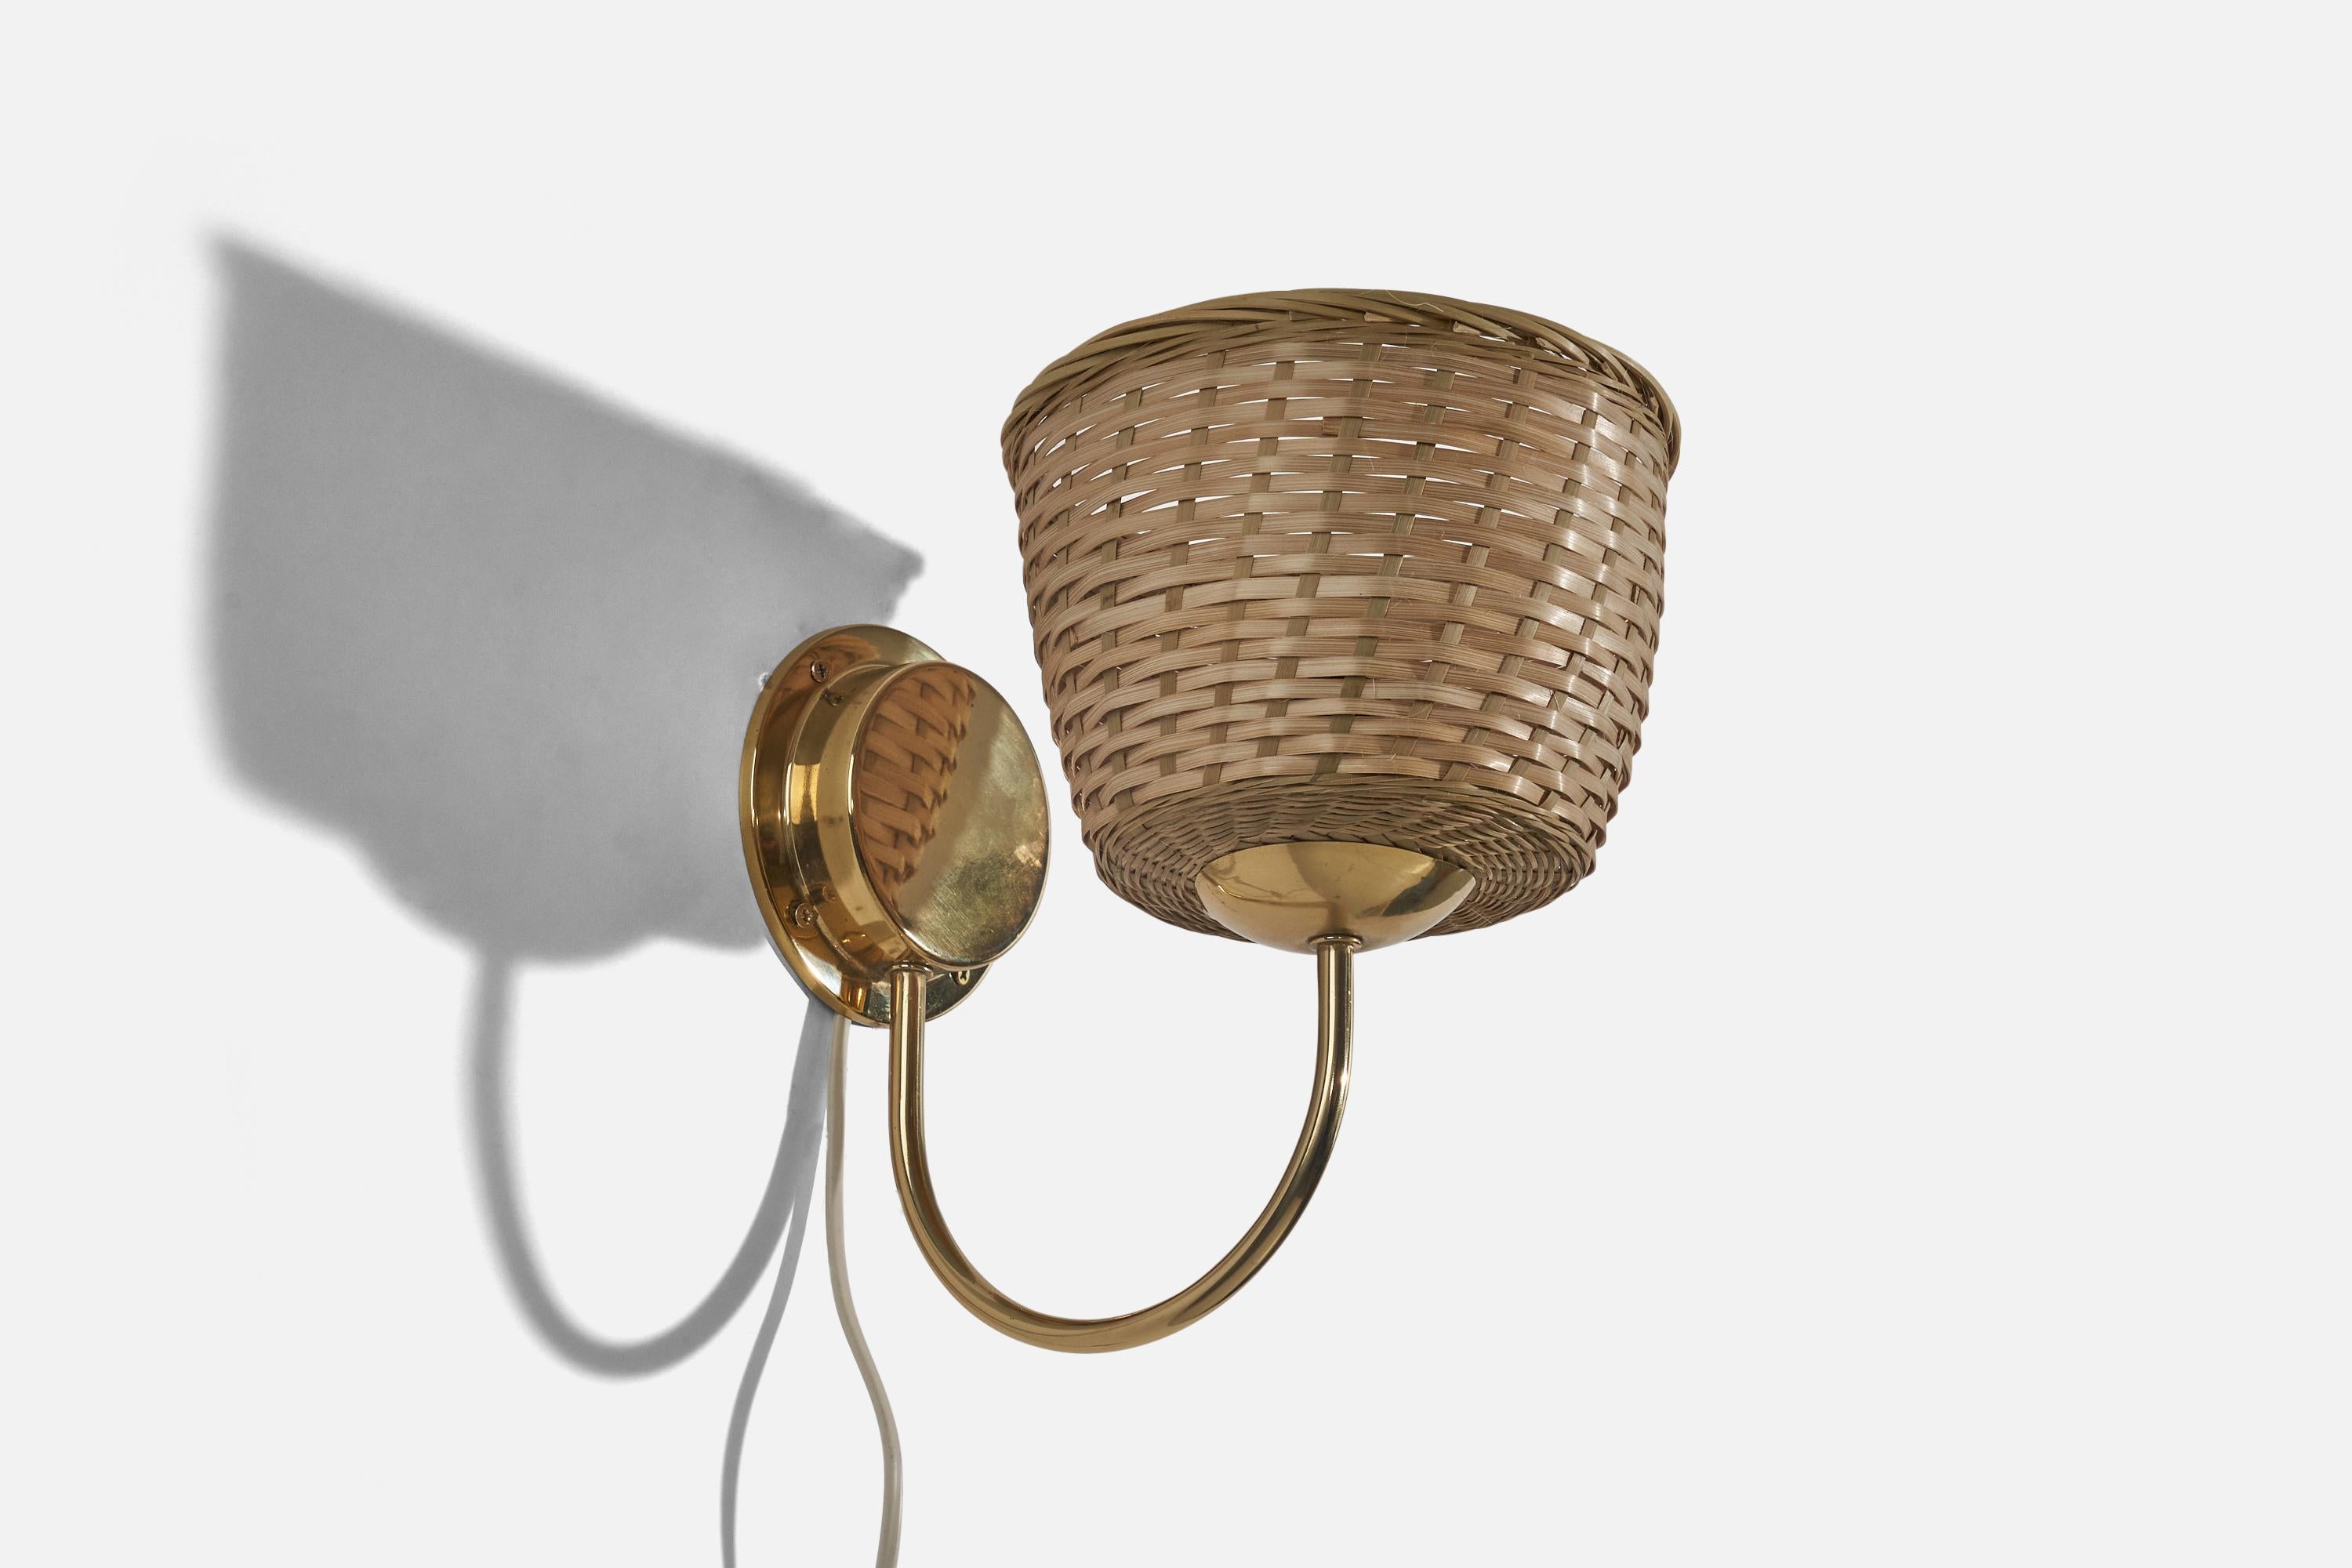 A brass and rattan wall light designed and produced in Sweden, c. 1940s.

Lampshade can be purchased with the lamp.
Dimensions of back plate (inches) : 4.31 x 4.31 x 1.18 (H x W x D).